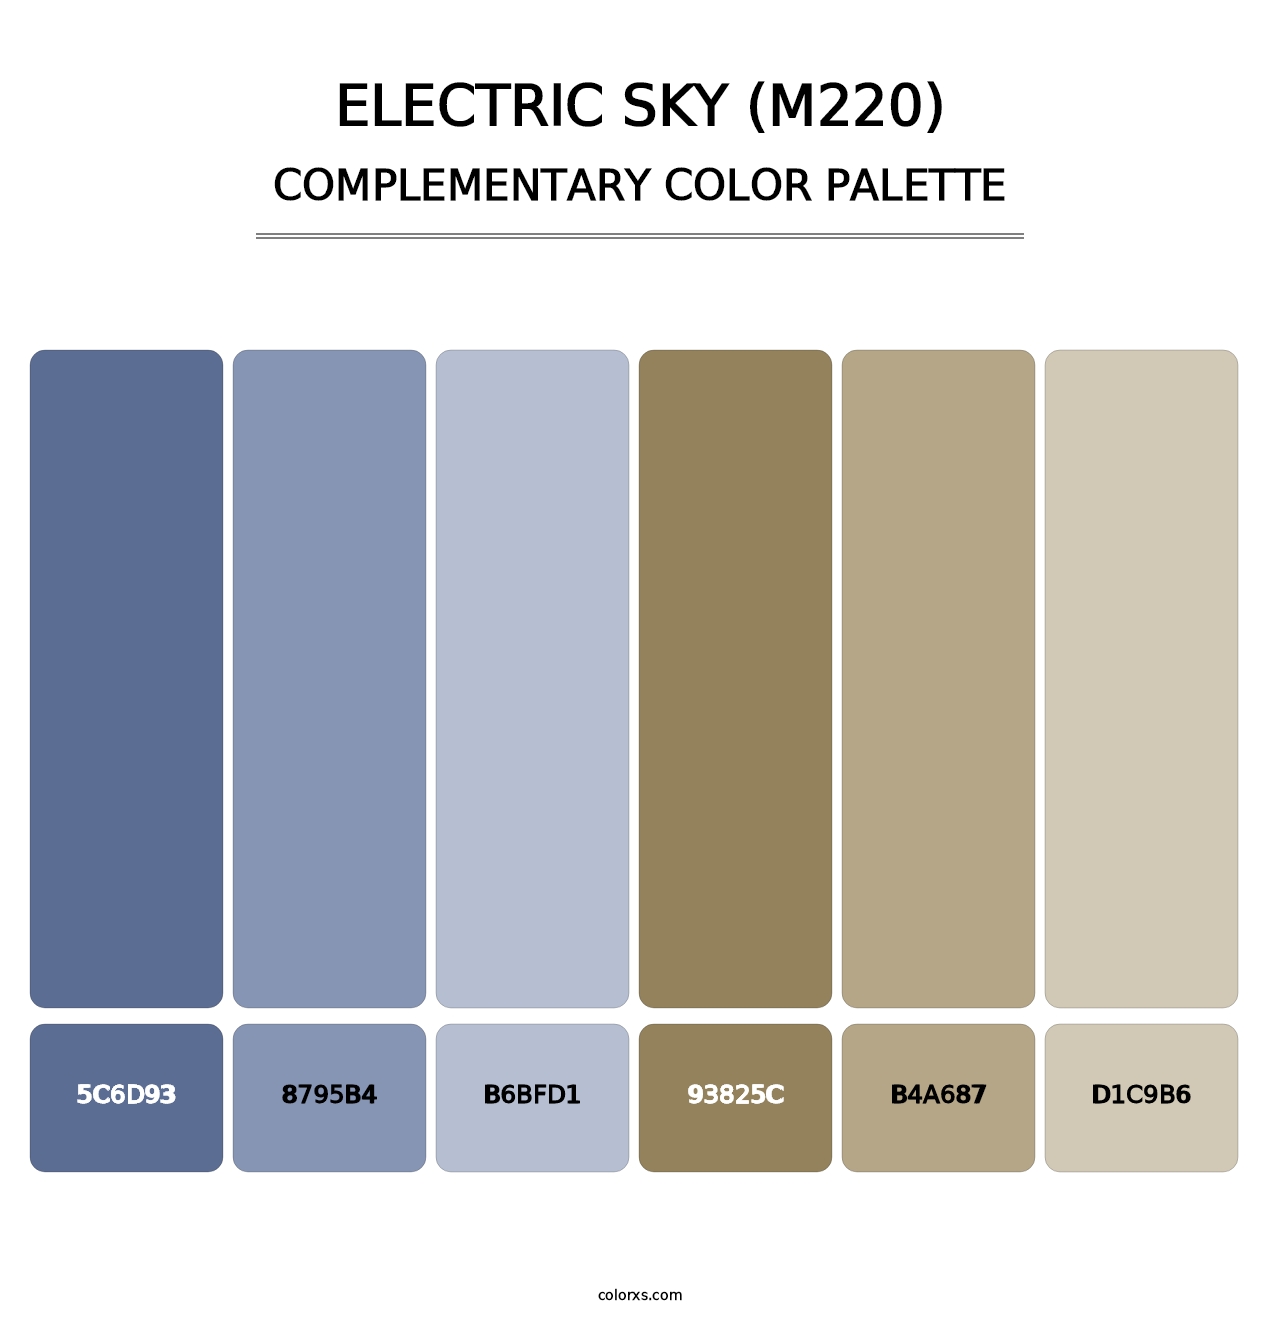 Electric Sky (M220) - Complementary Color Palette